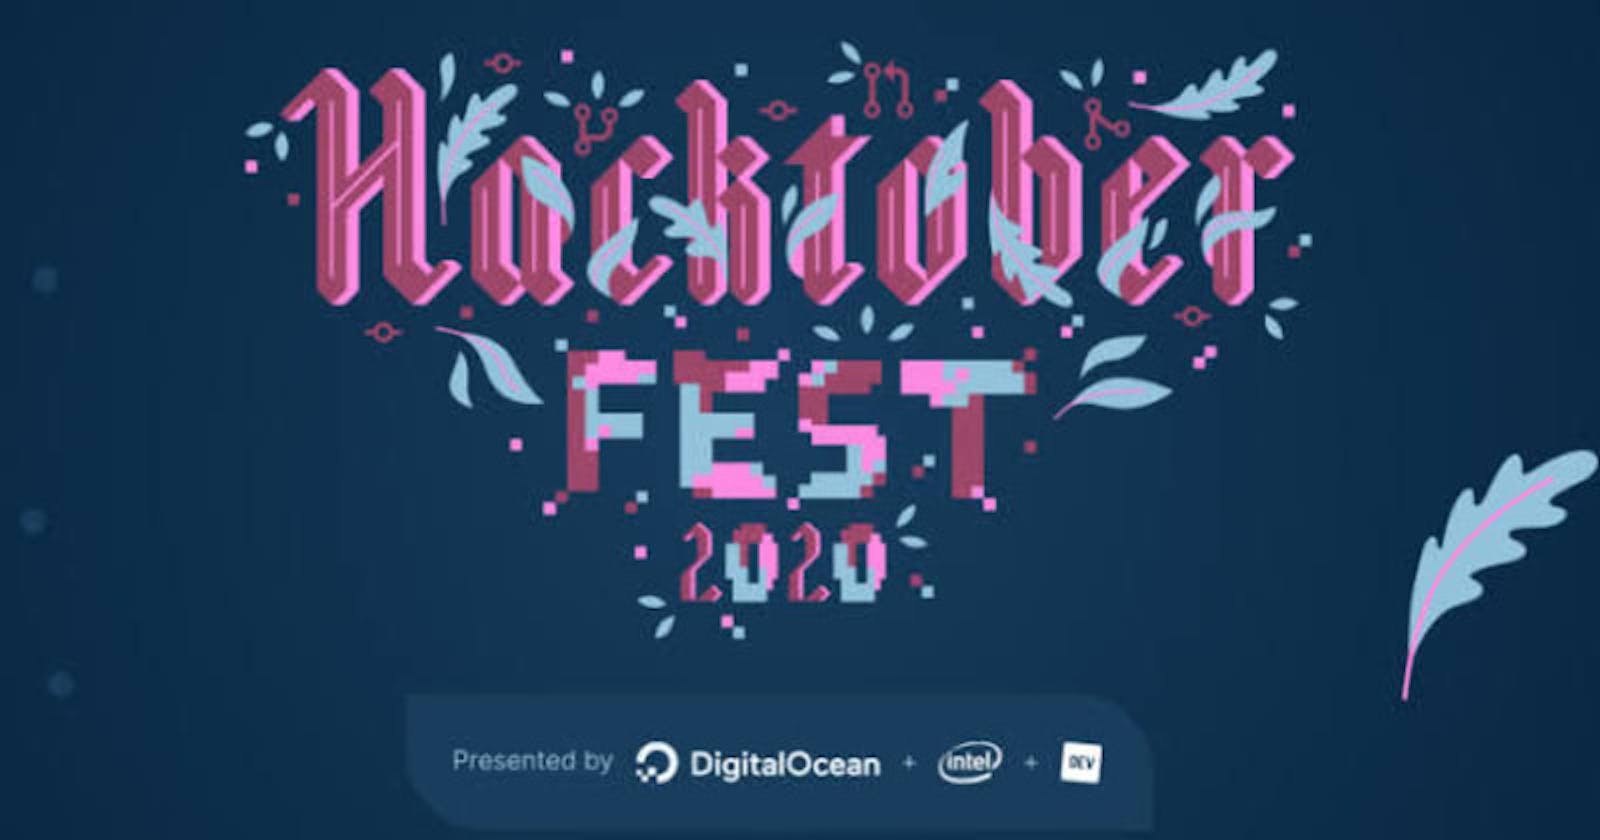 Successfully completed Hacktoberfest 2020